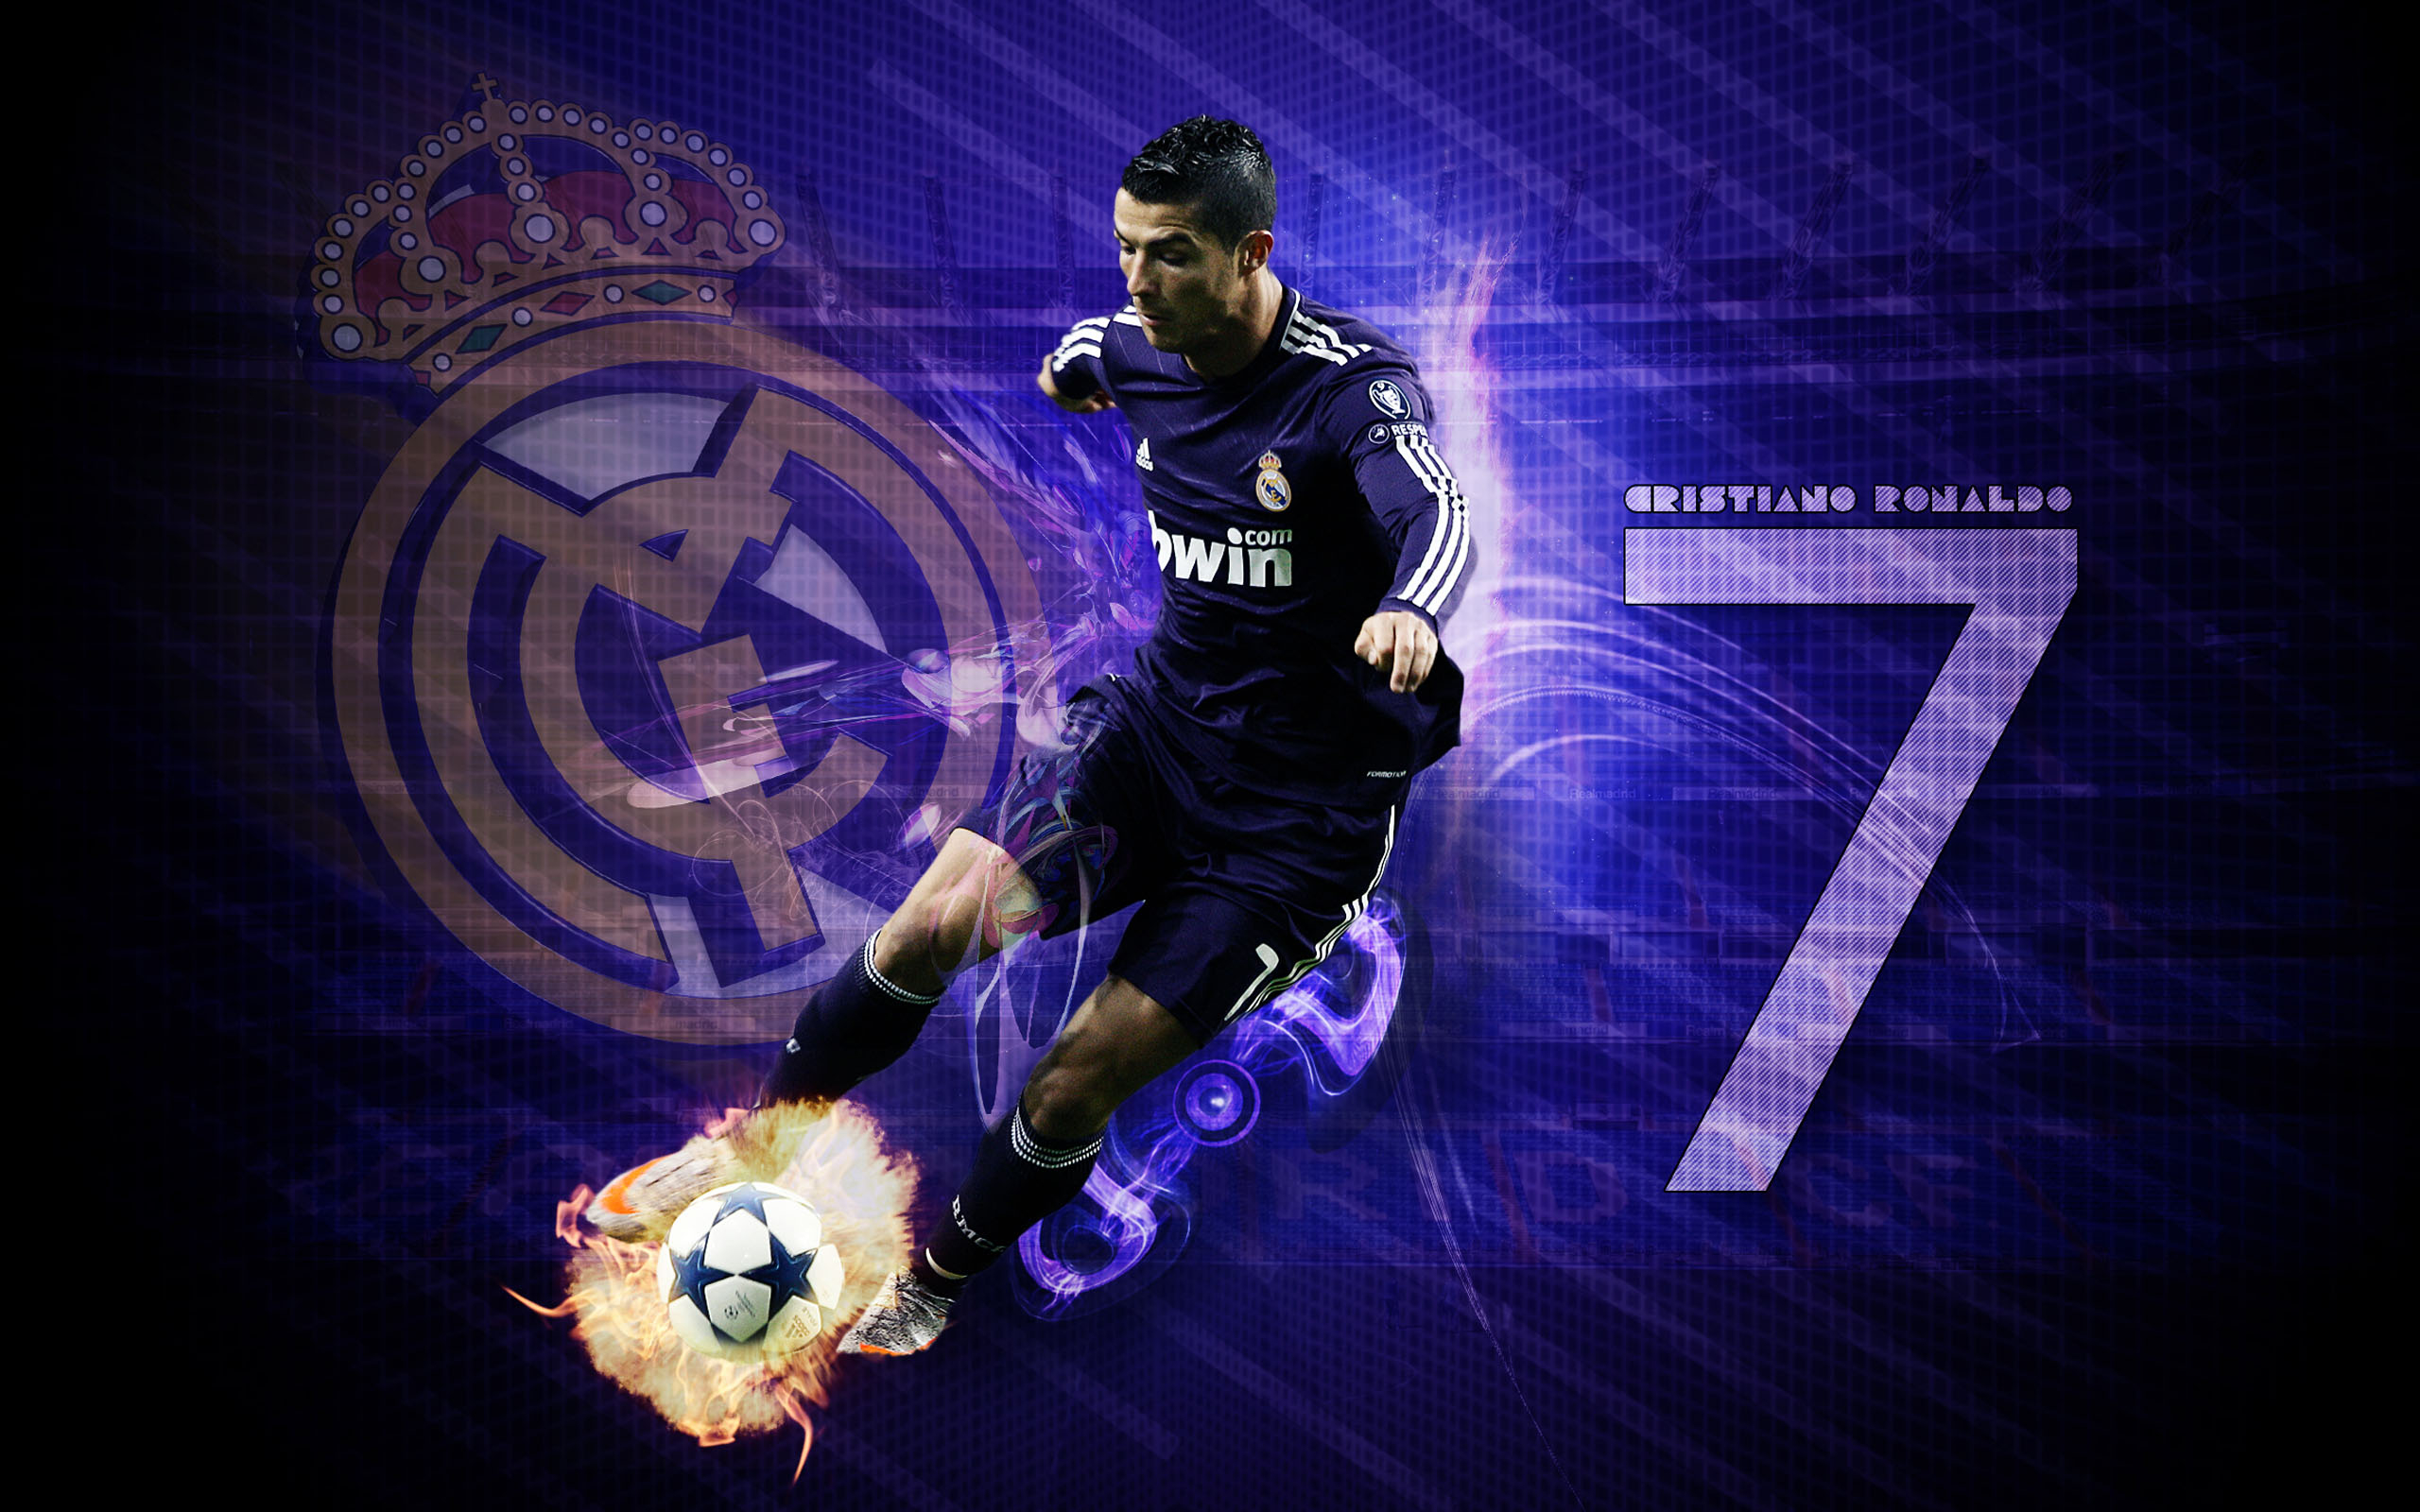 2560x1600 cristiano-ronaldo-real-madrid-wallpaper-sports-images-real-madrid-hd- | Age of Wonders III